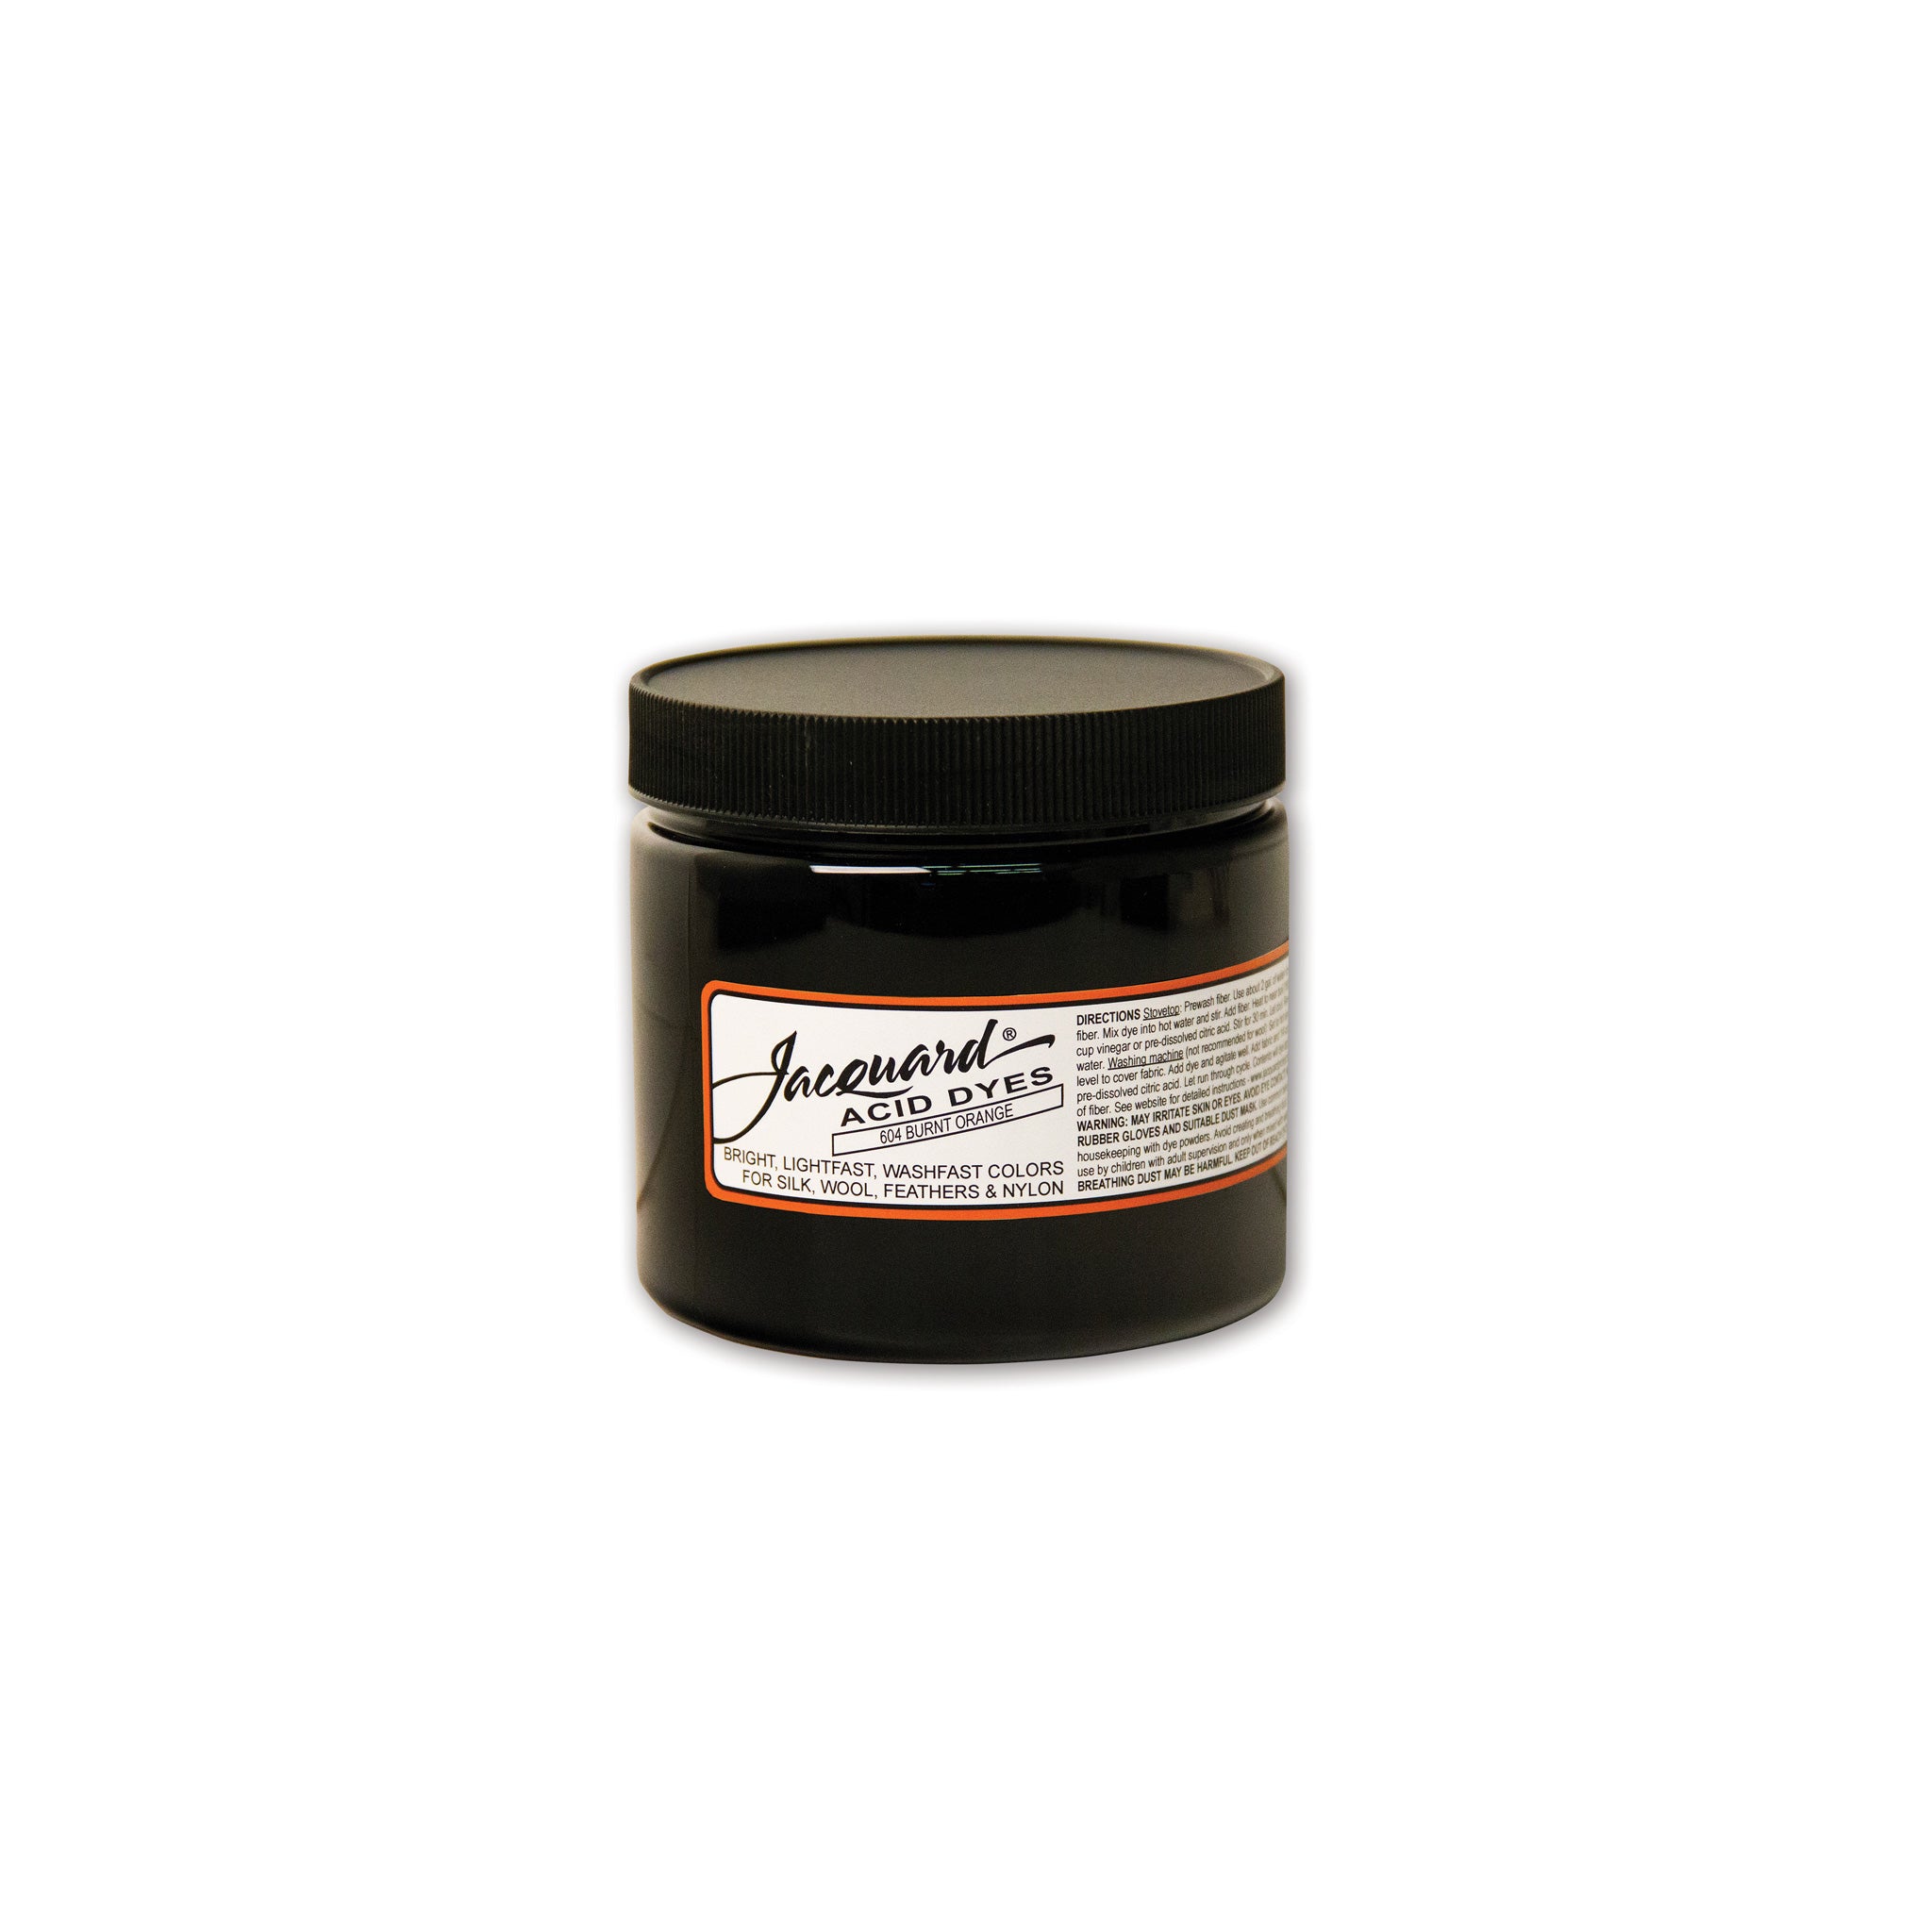 Jacquard Acid Dye - Jet Black - 8 Oz Net Wt - Acid Dye for Wool - Silk -  Feathers - and Nylons - Brilliant Colorfast and Highly Concentrated